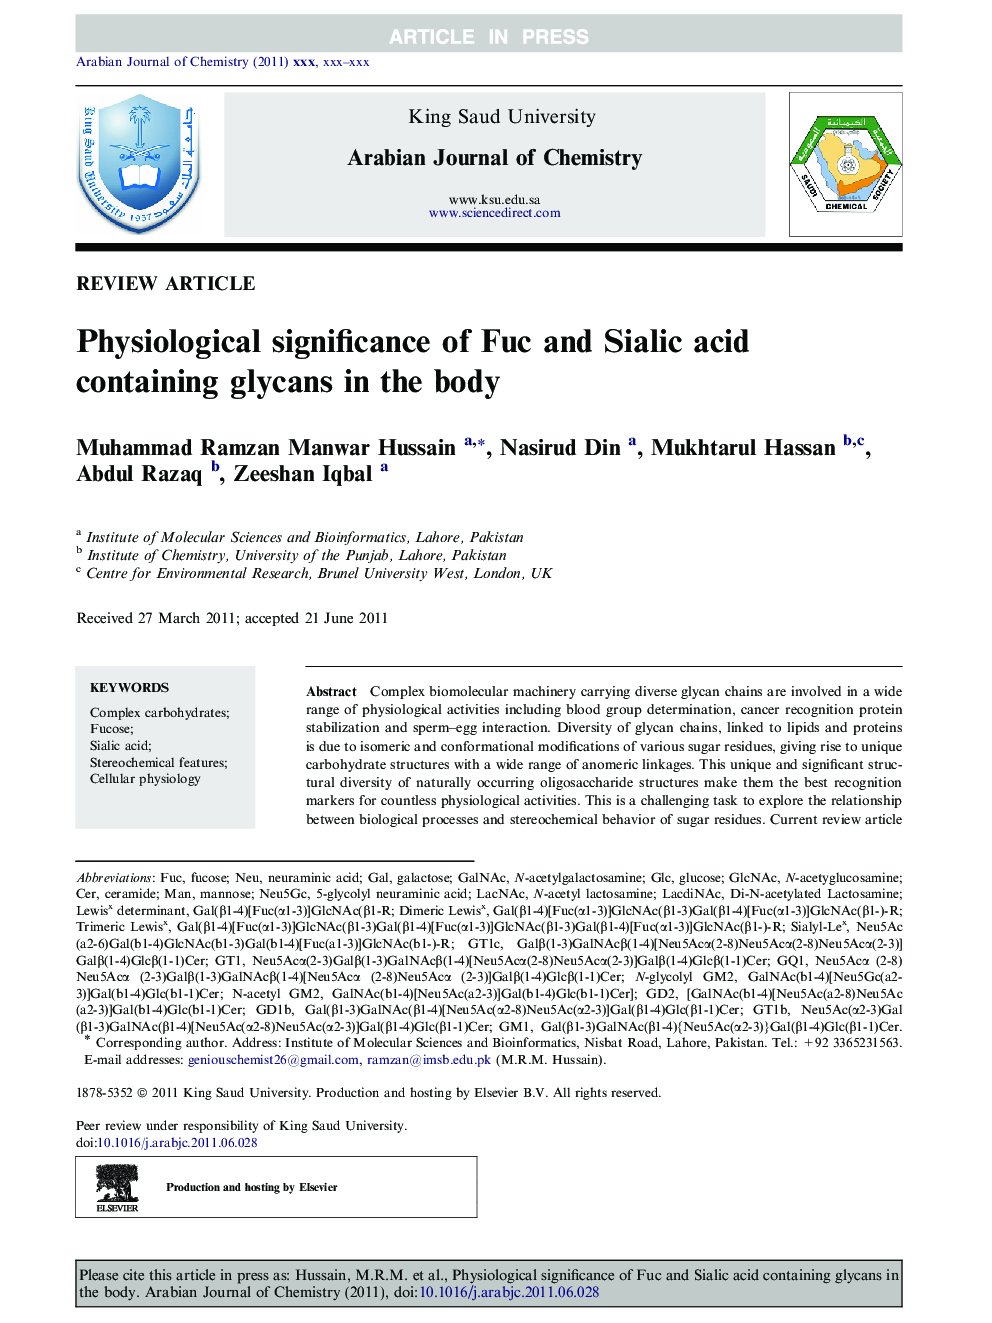 Physiological significance of Fuc and Sialic acid containing glycans in the body